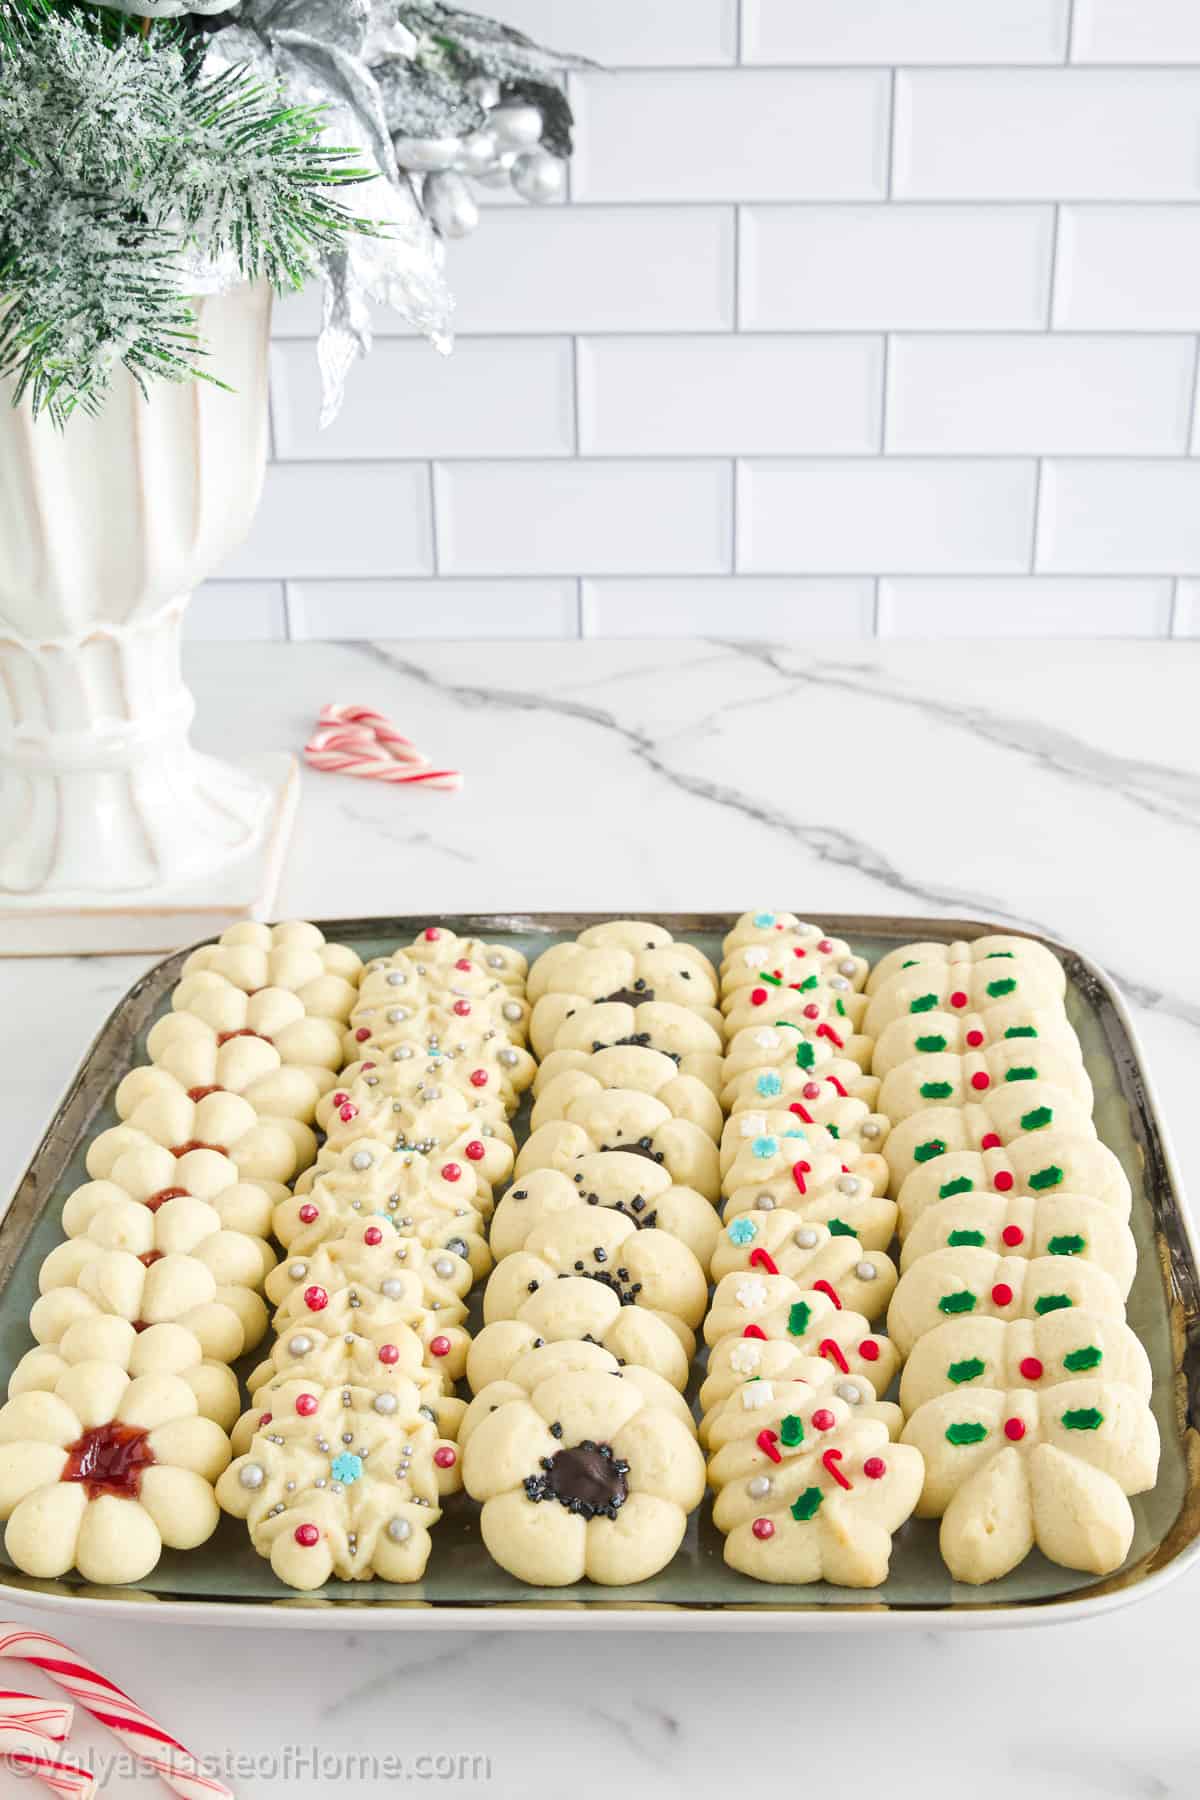 This is, by far, one of the best Christmas cookie recipes you'll ever try! I've been making these Christmas cookies for years and years, and they are truly the traditional Christmas cookie recipe in our family.